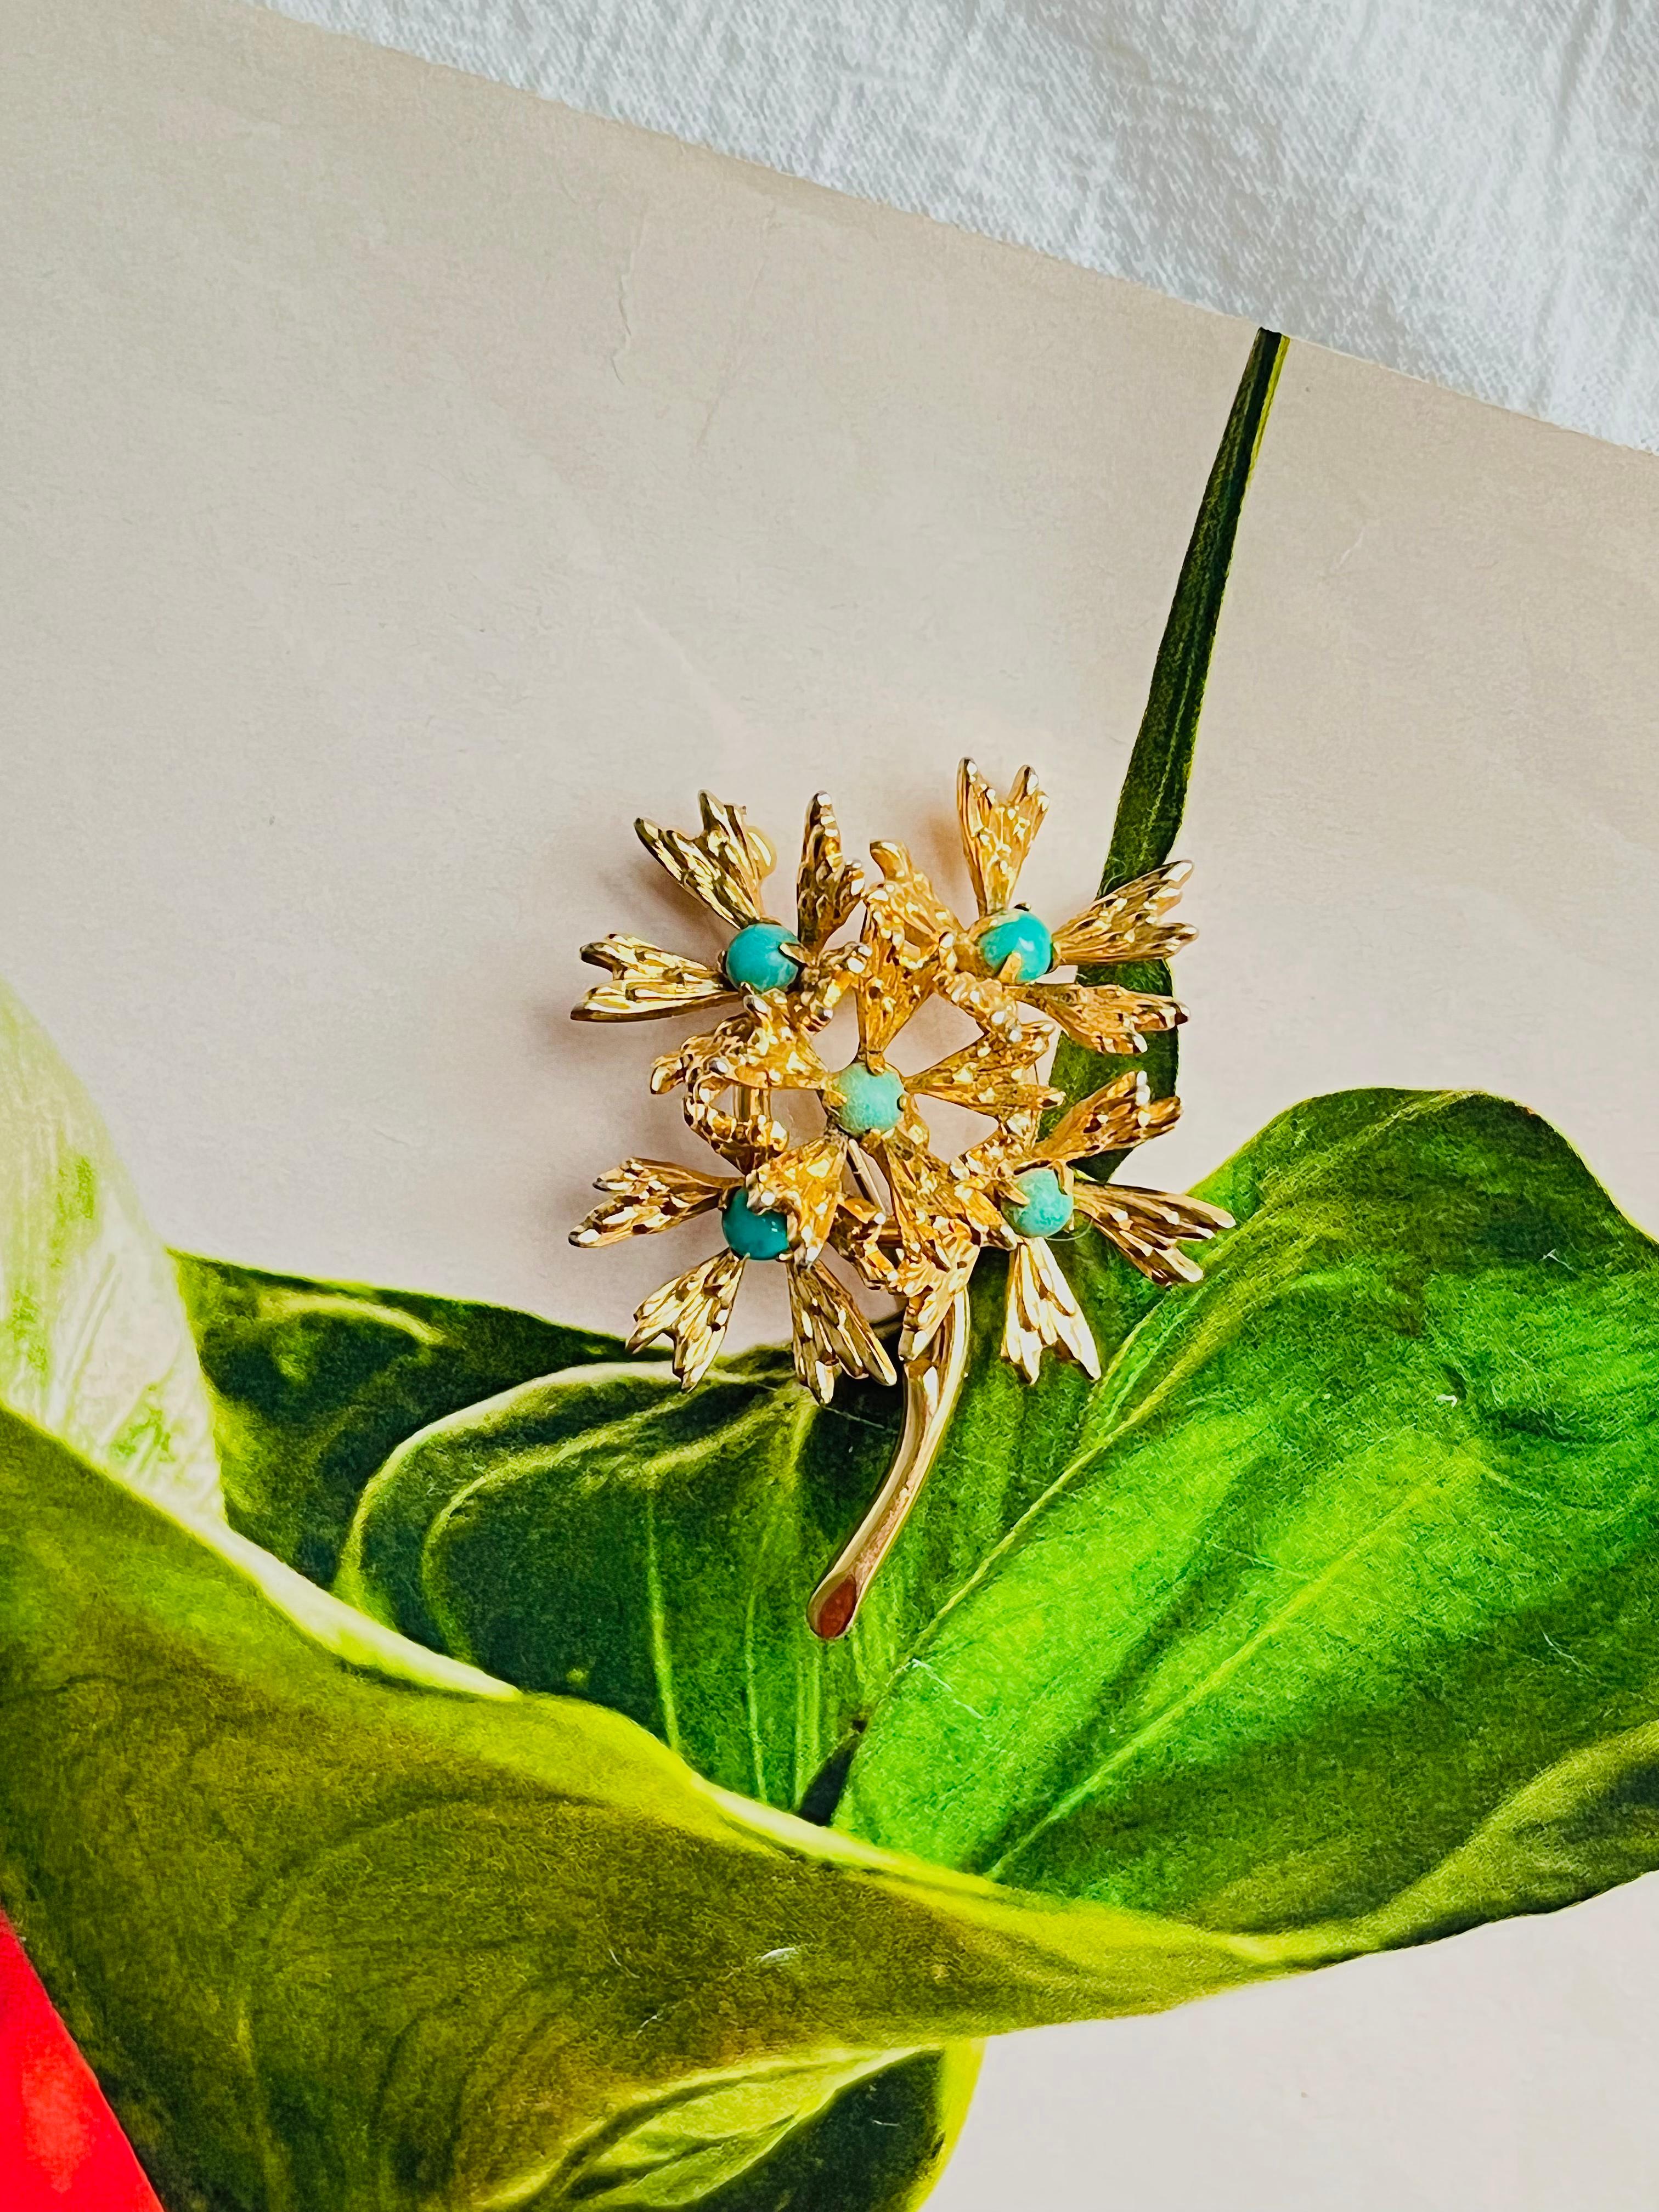 Christian Dior GROSSE 1965 Turquoise Stone Cluster Flower Bouquet Brooch, Gold Tone

Very good condition. Light scratches or colour loss, barely noticeable.

Signed at the rear. Rare to find. 100% Genuine.

Size: 5.0 cm x 4.0 cm.

Weight: 10.0 g.

_